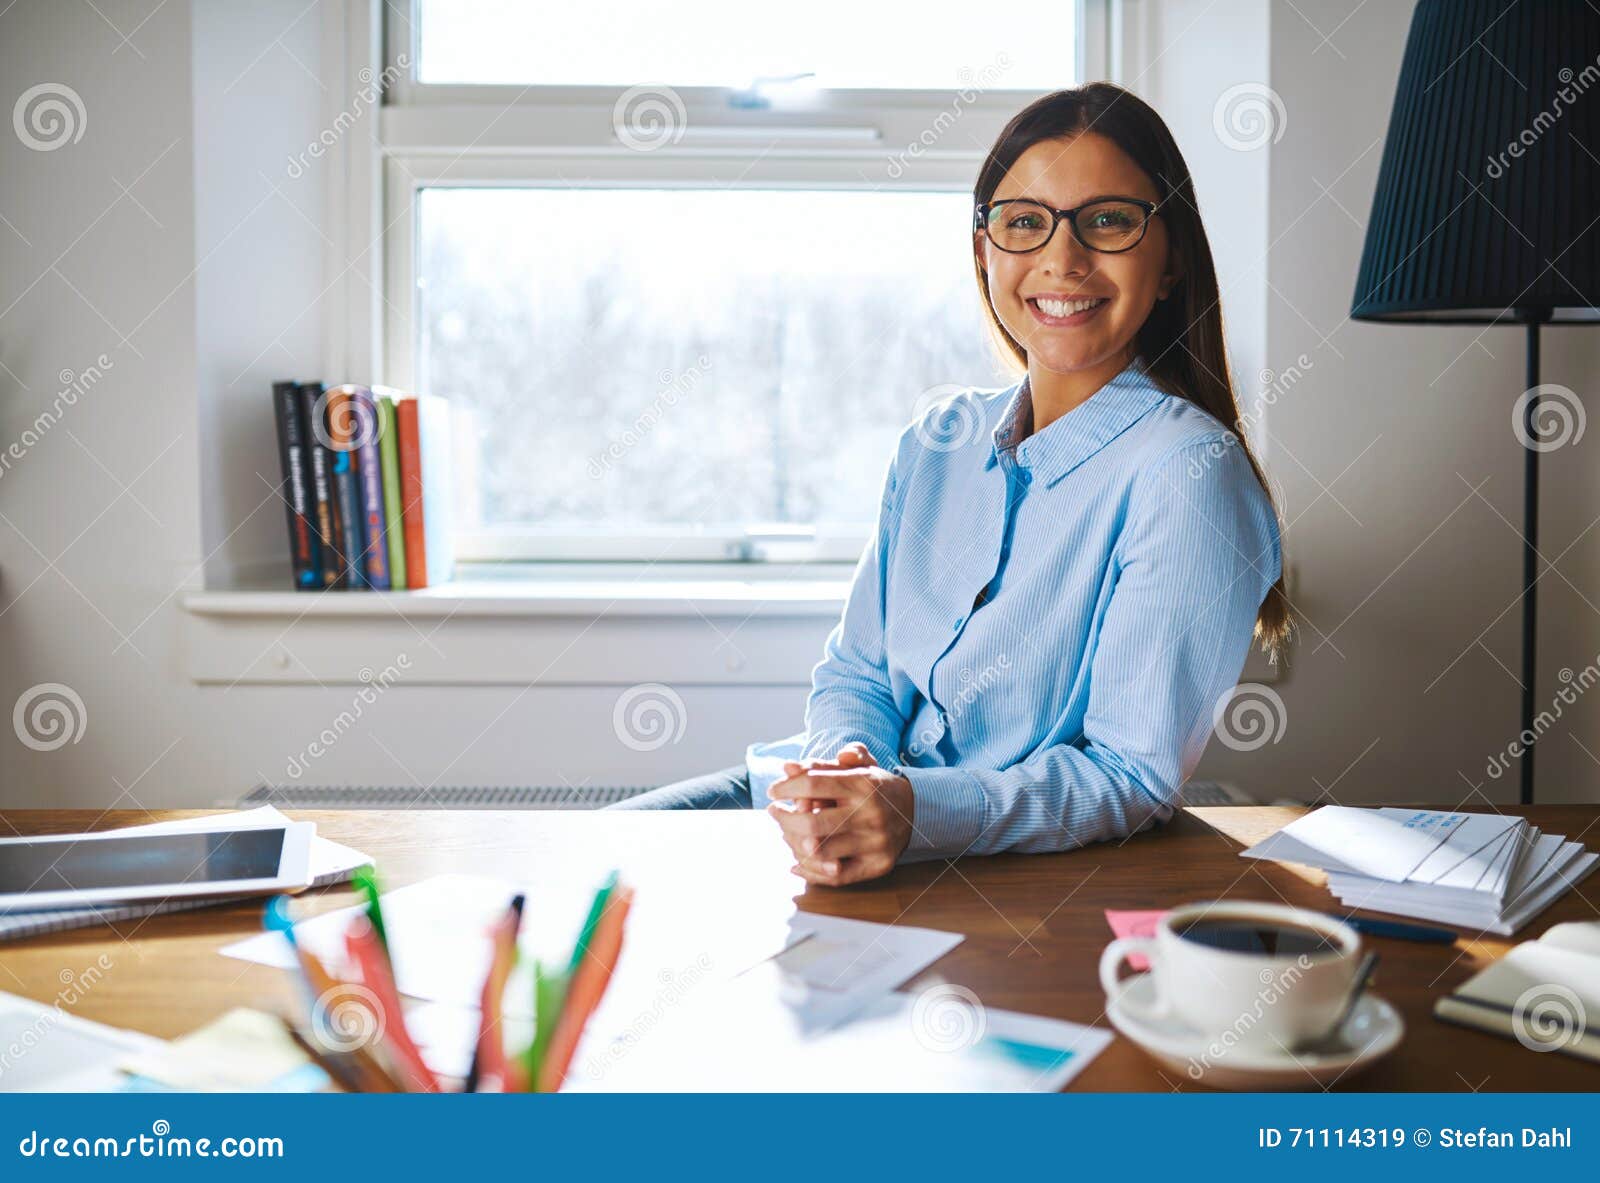 self employed woman wearing glasses at desk